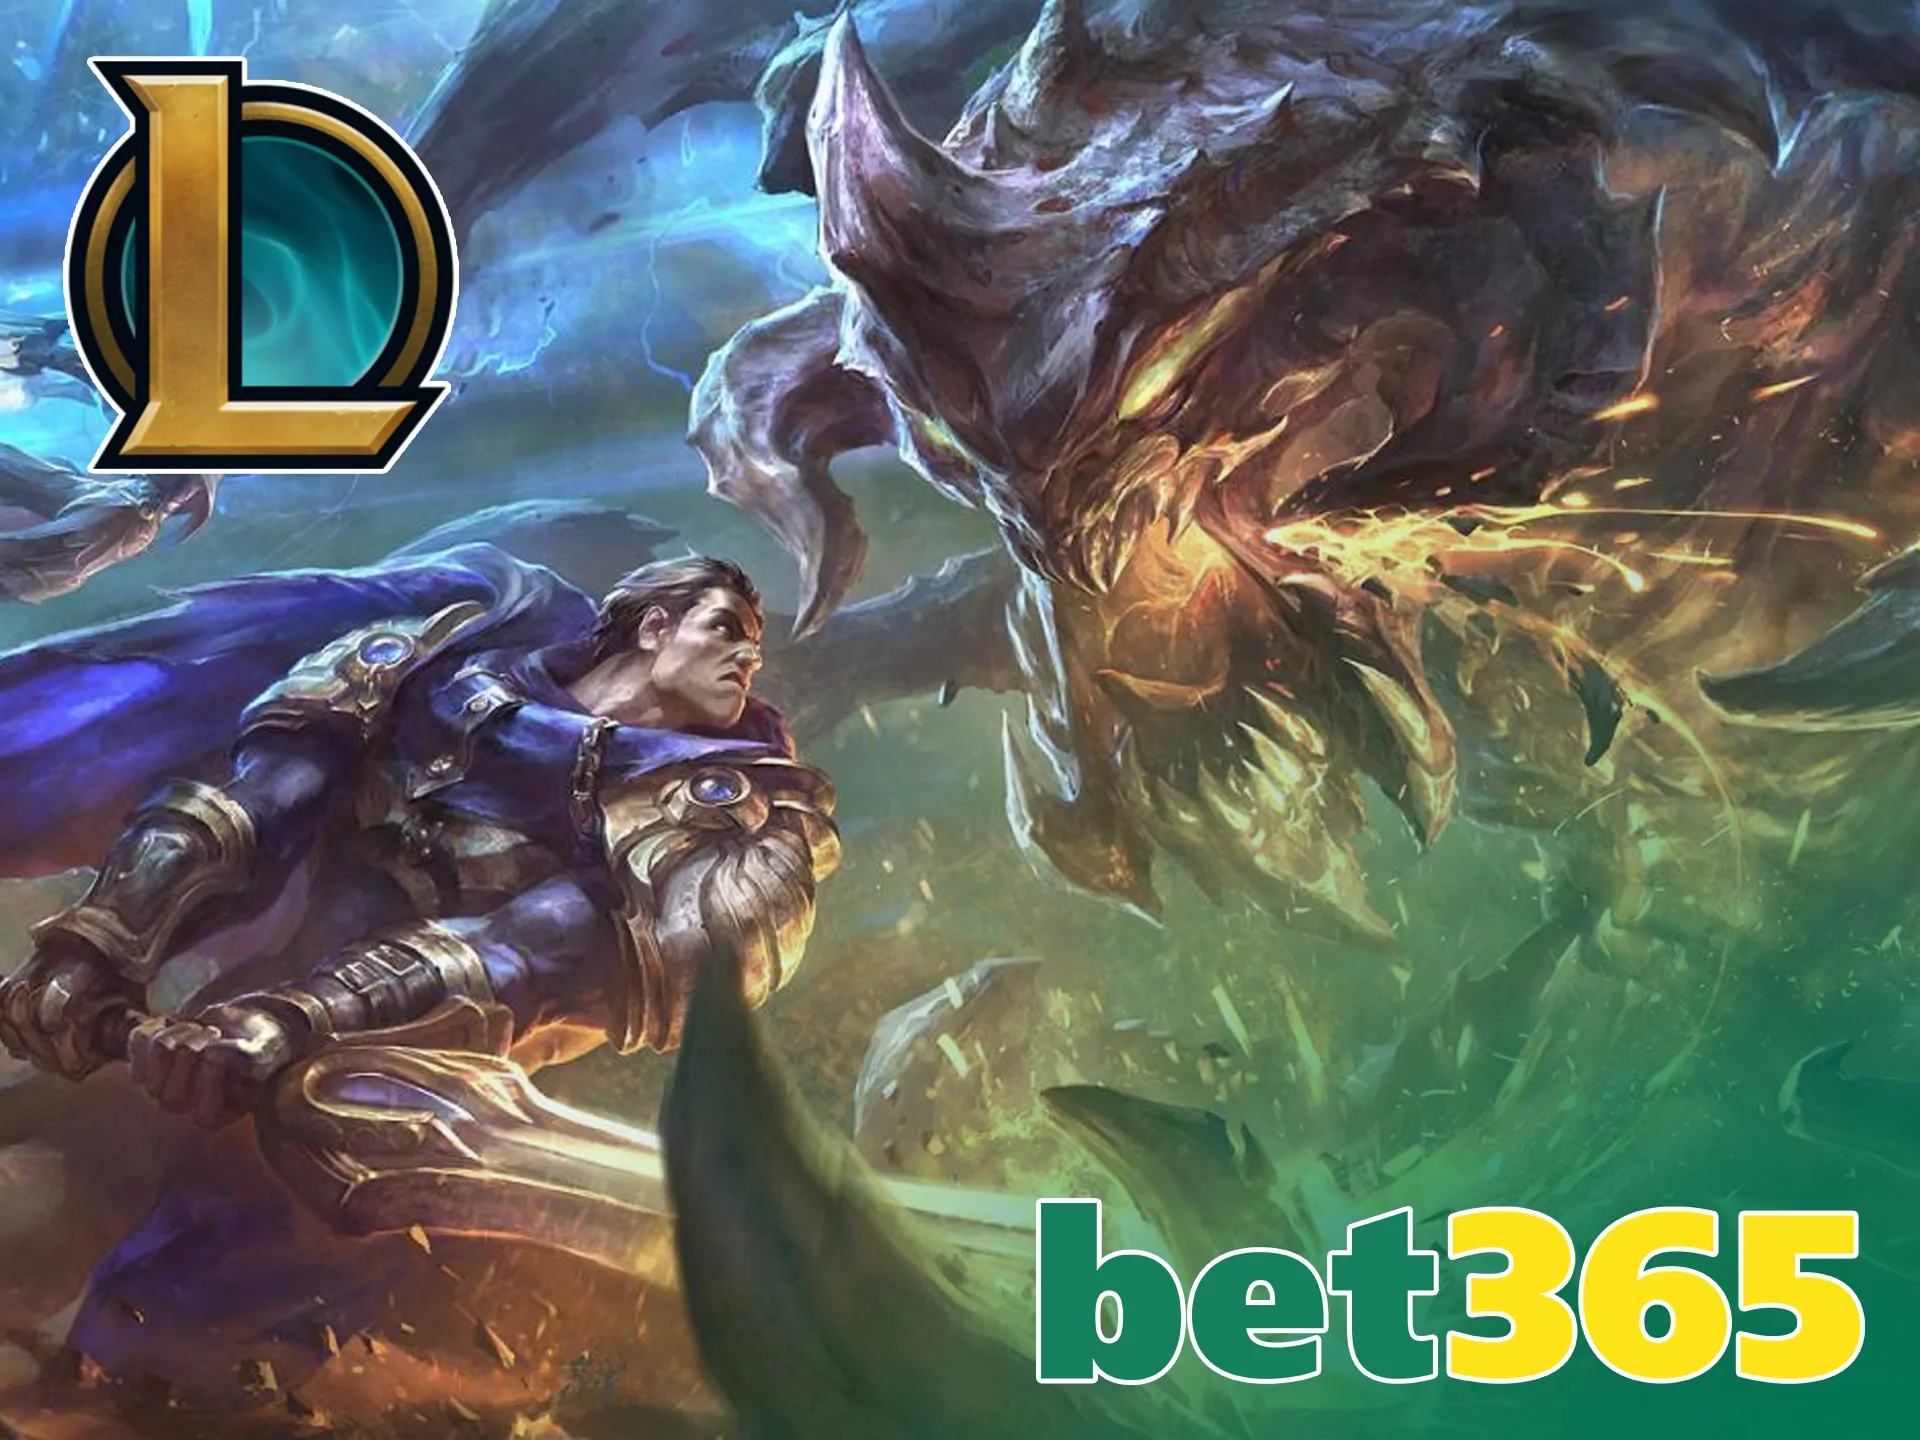 Bet on League of Legends team and win big prizes.